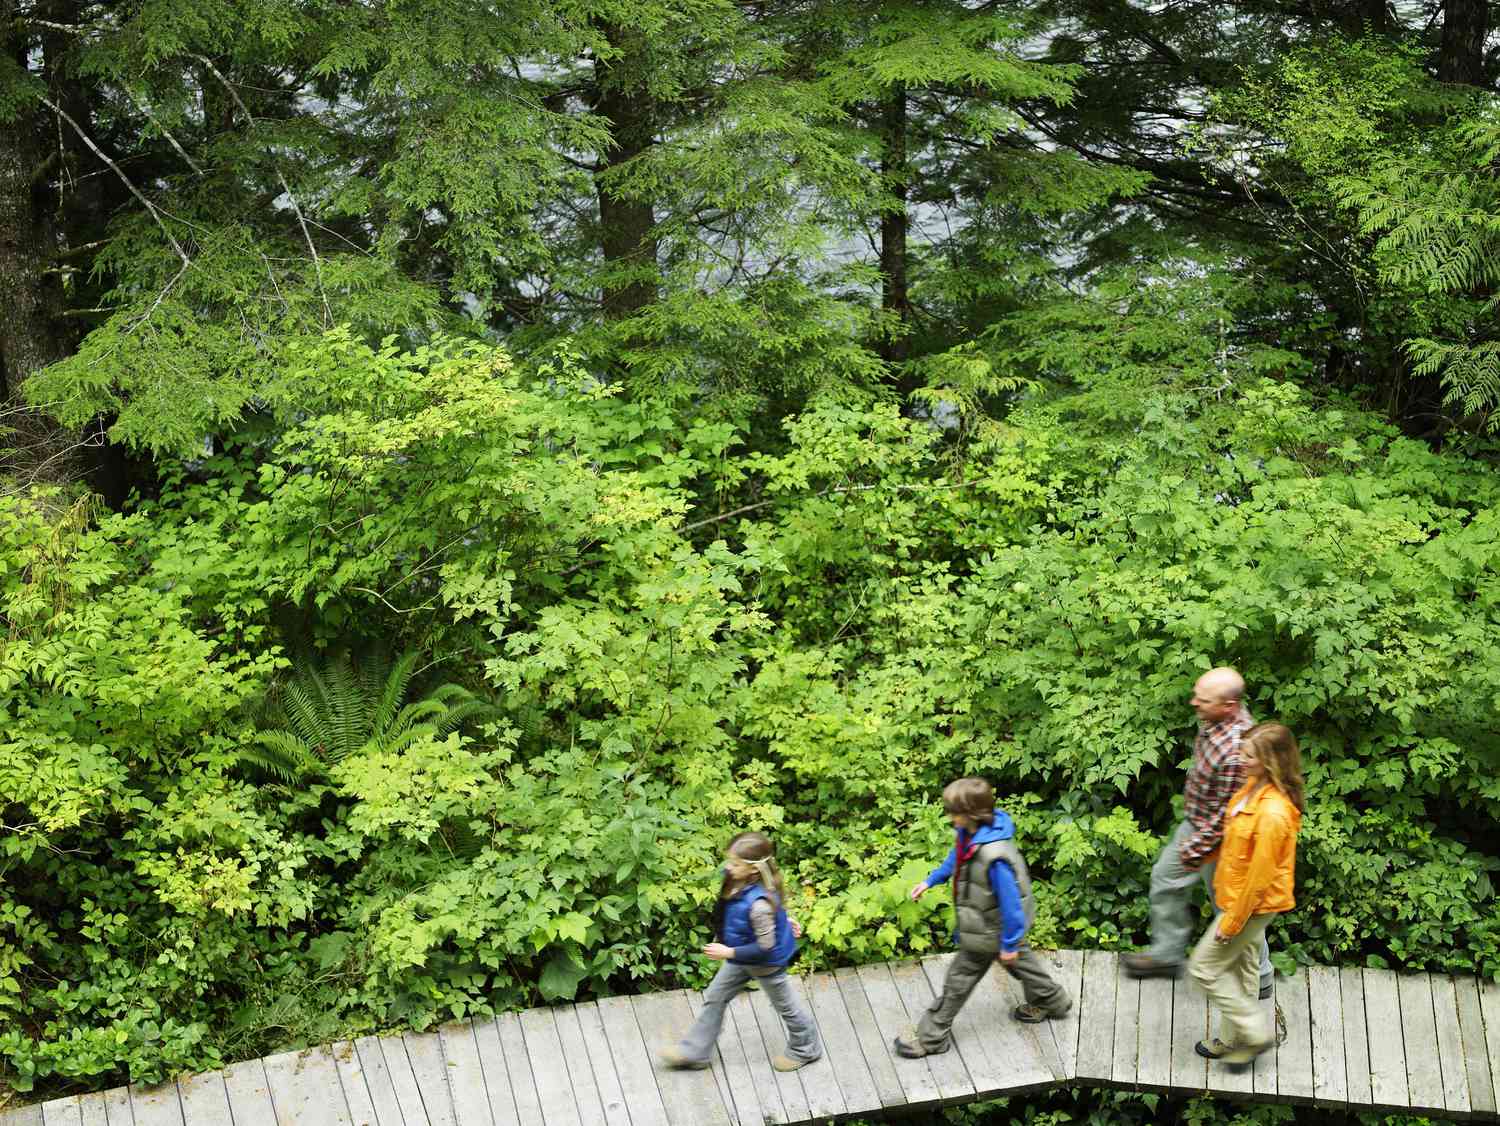 Family walking on pathway through forest.